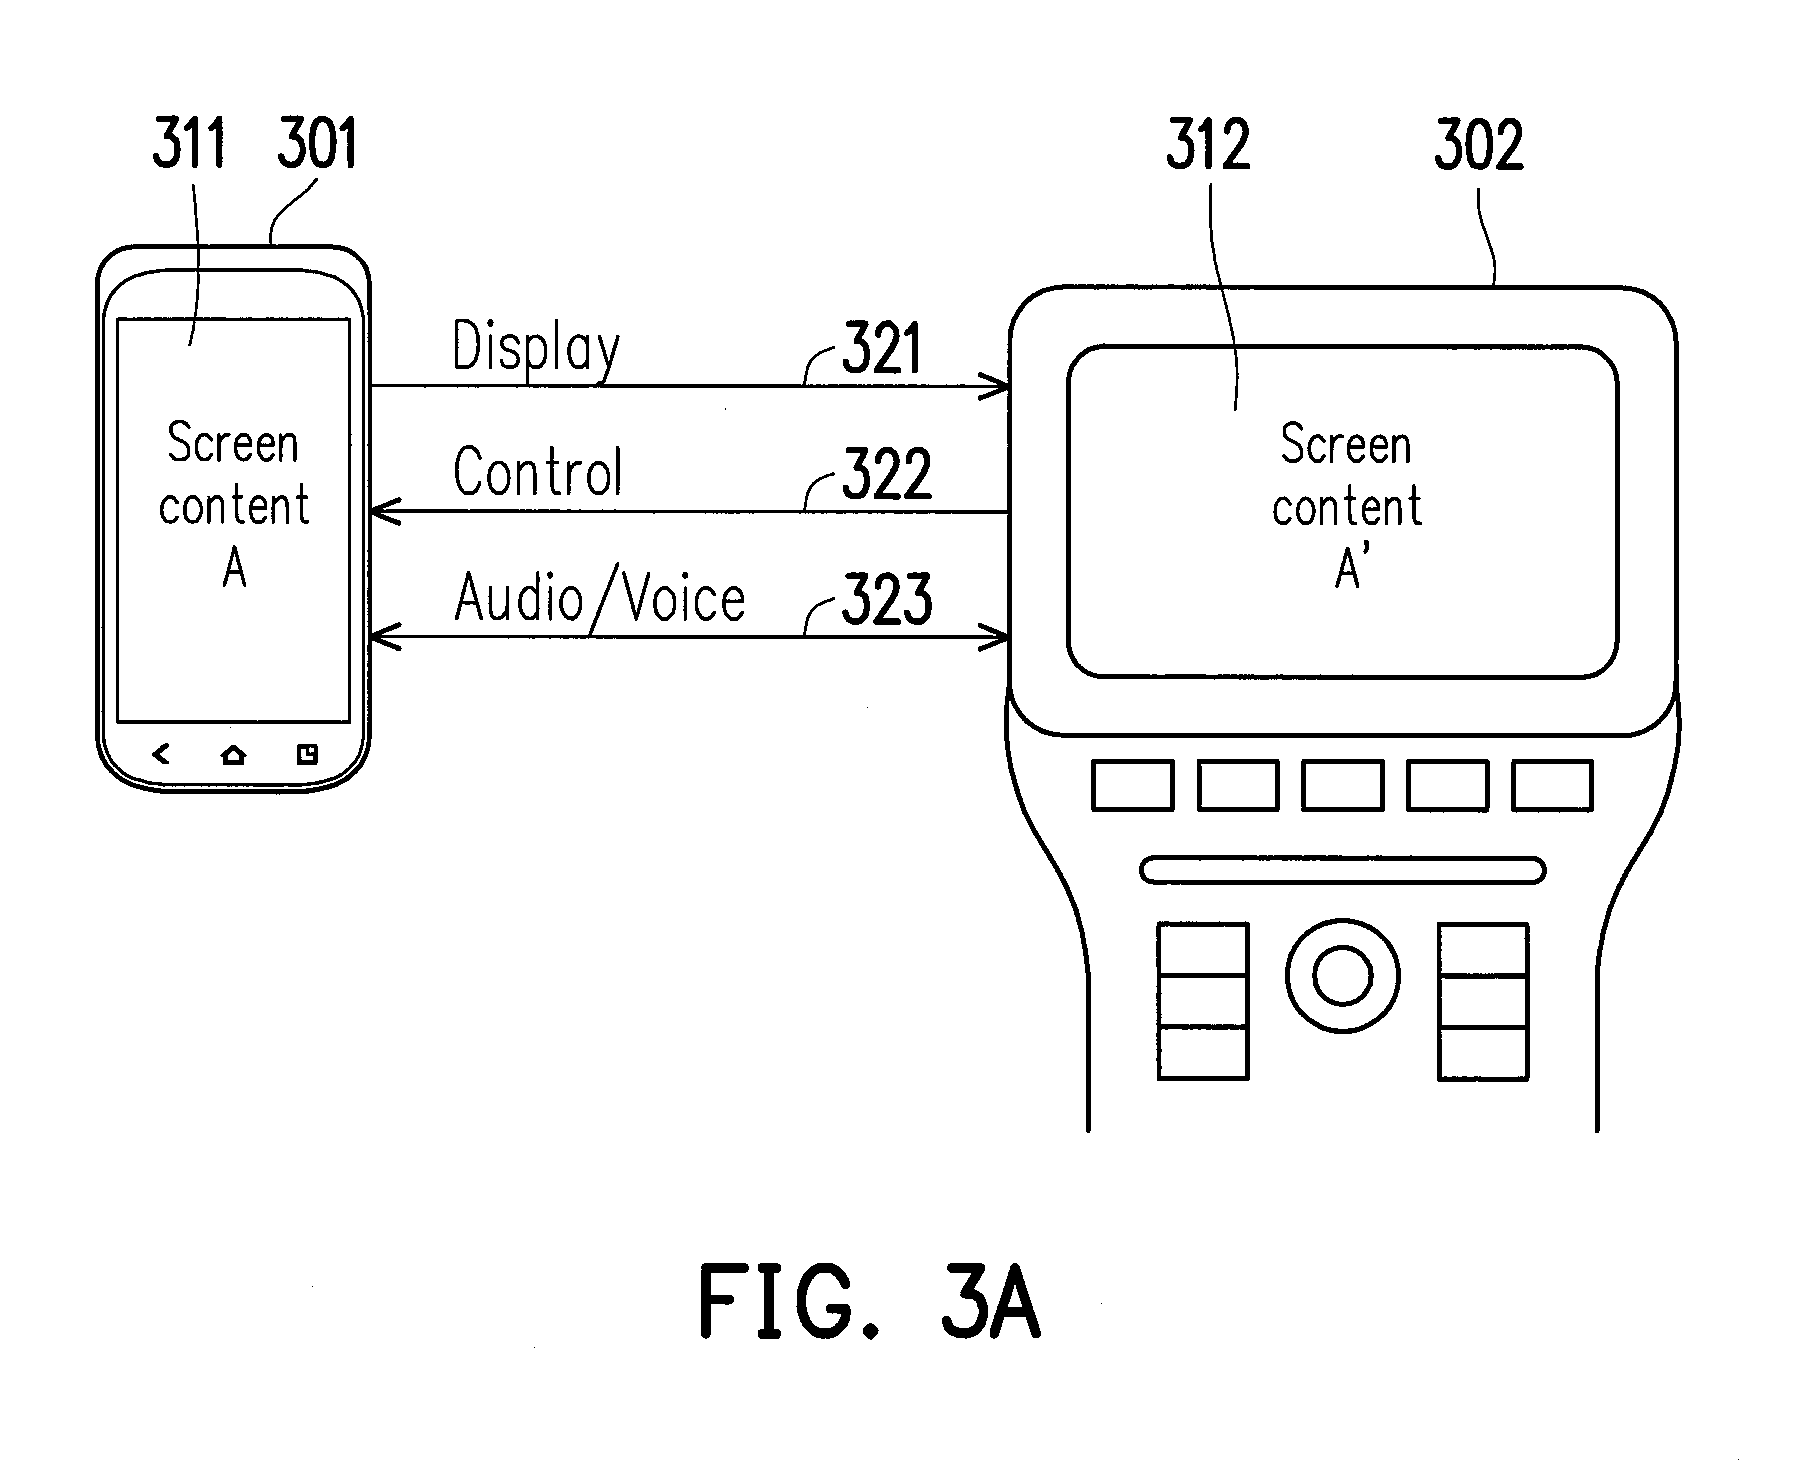 Method of controlling interaction between mobile electronic device and in-vehicle electronic system and devices using the same